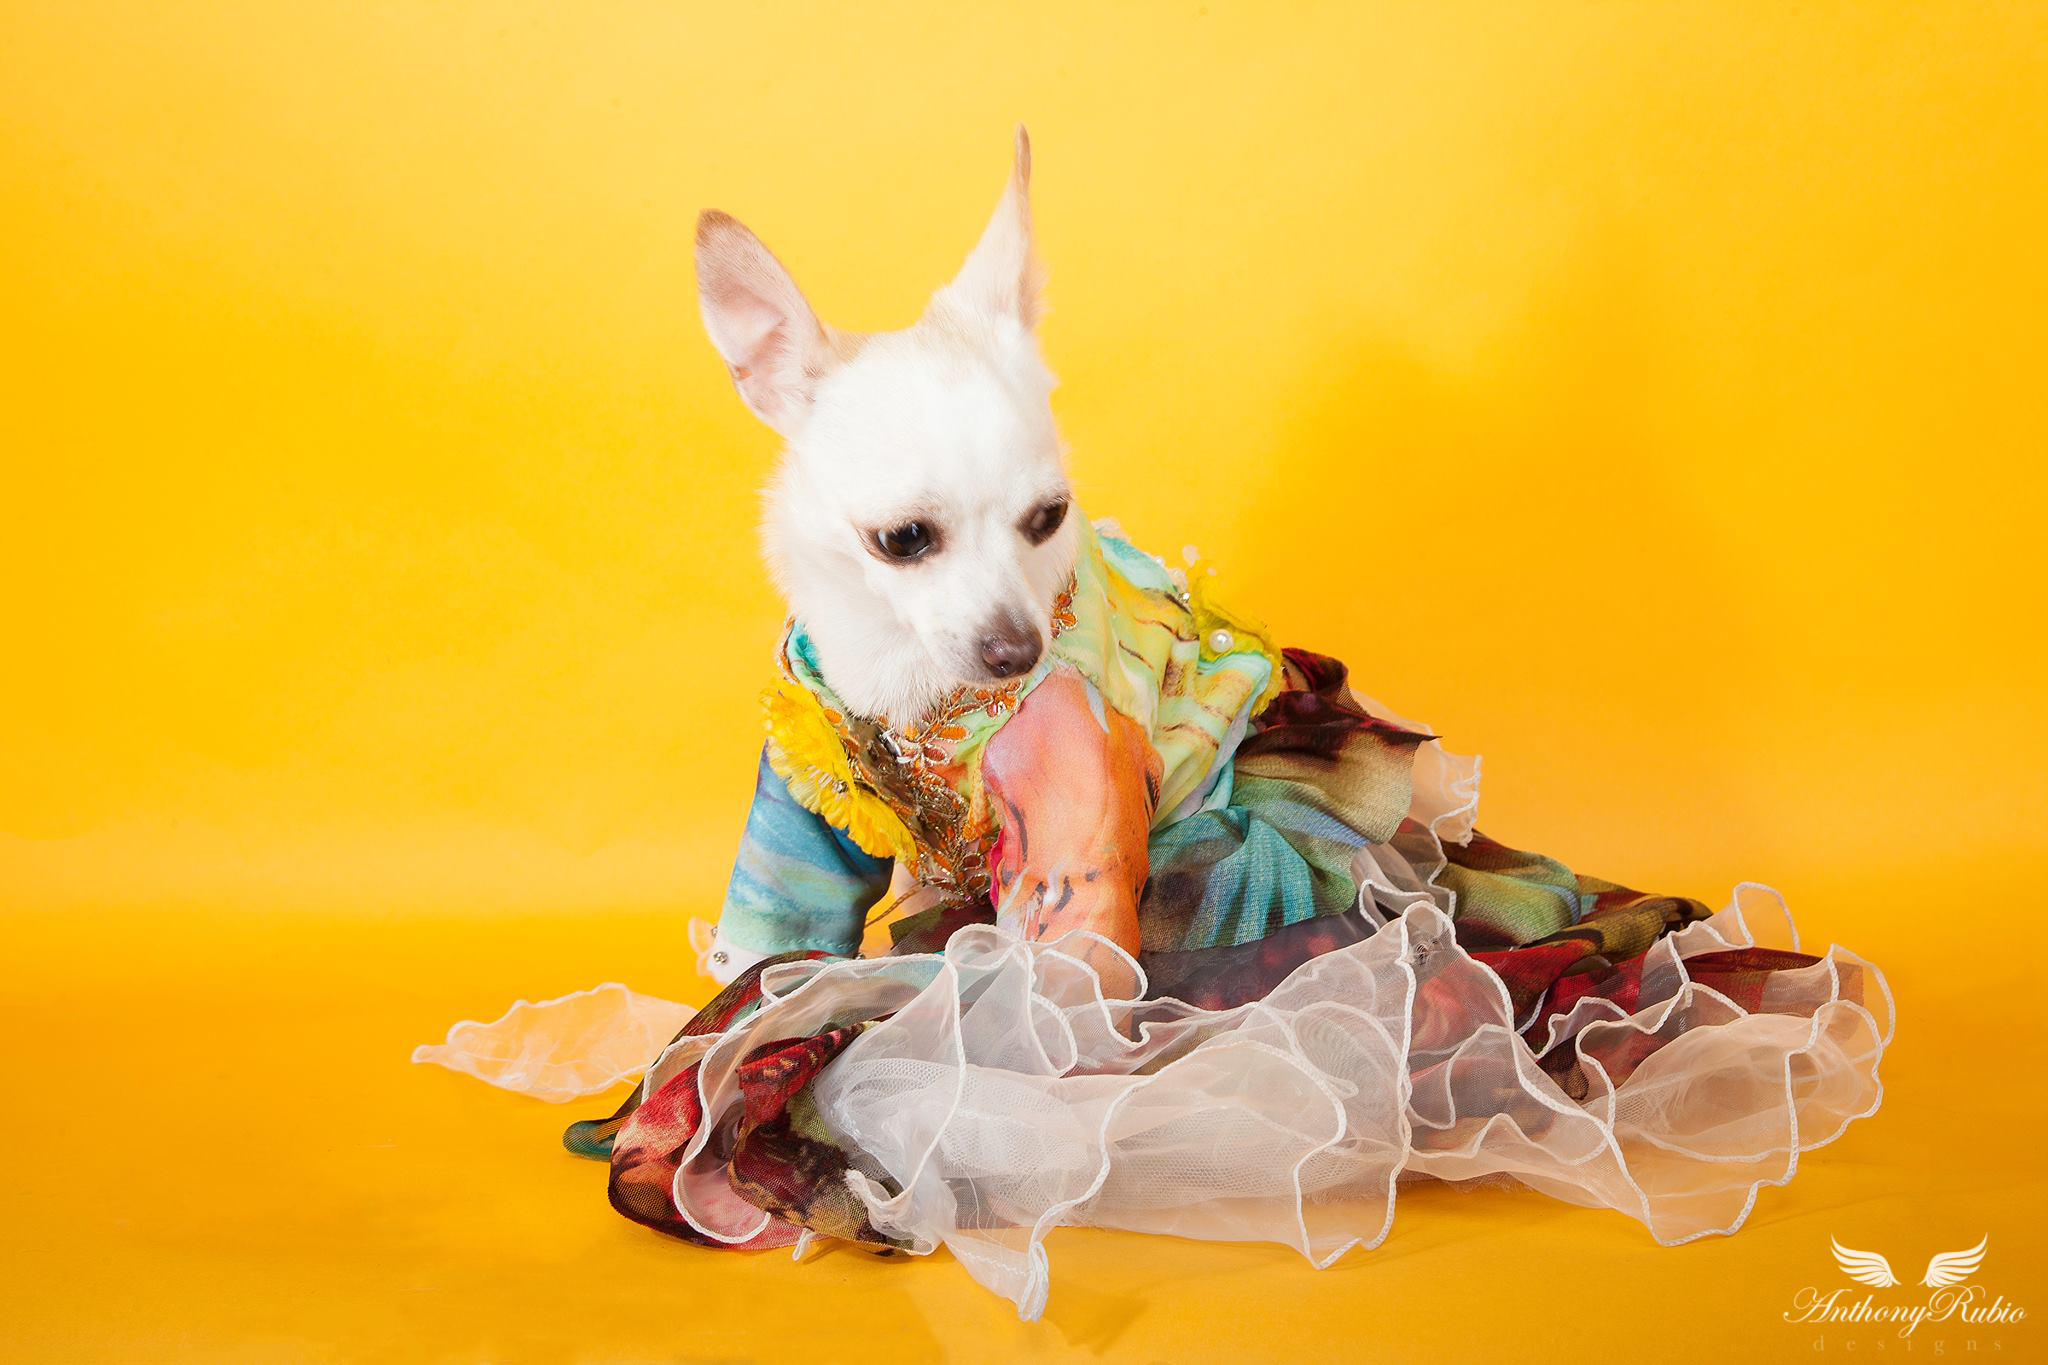 Dog Fashion by Anthony Rubio - Gowns For Dogs